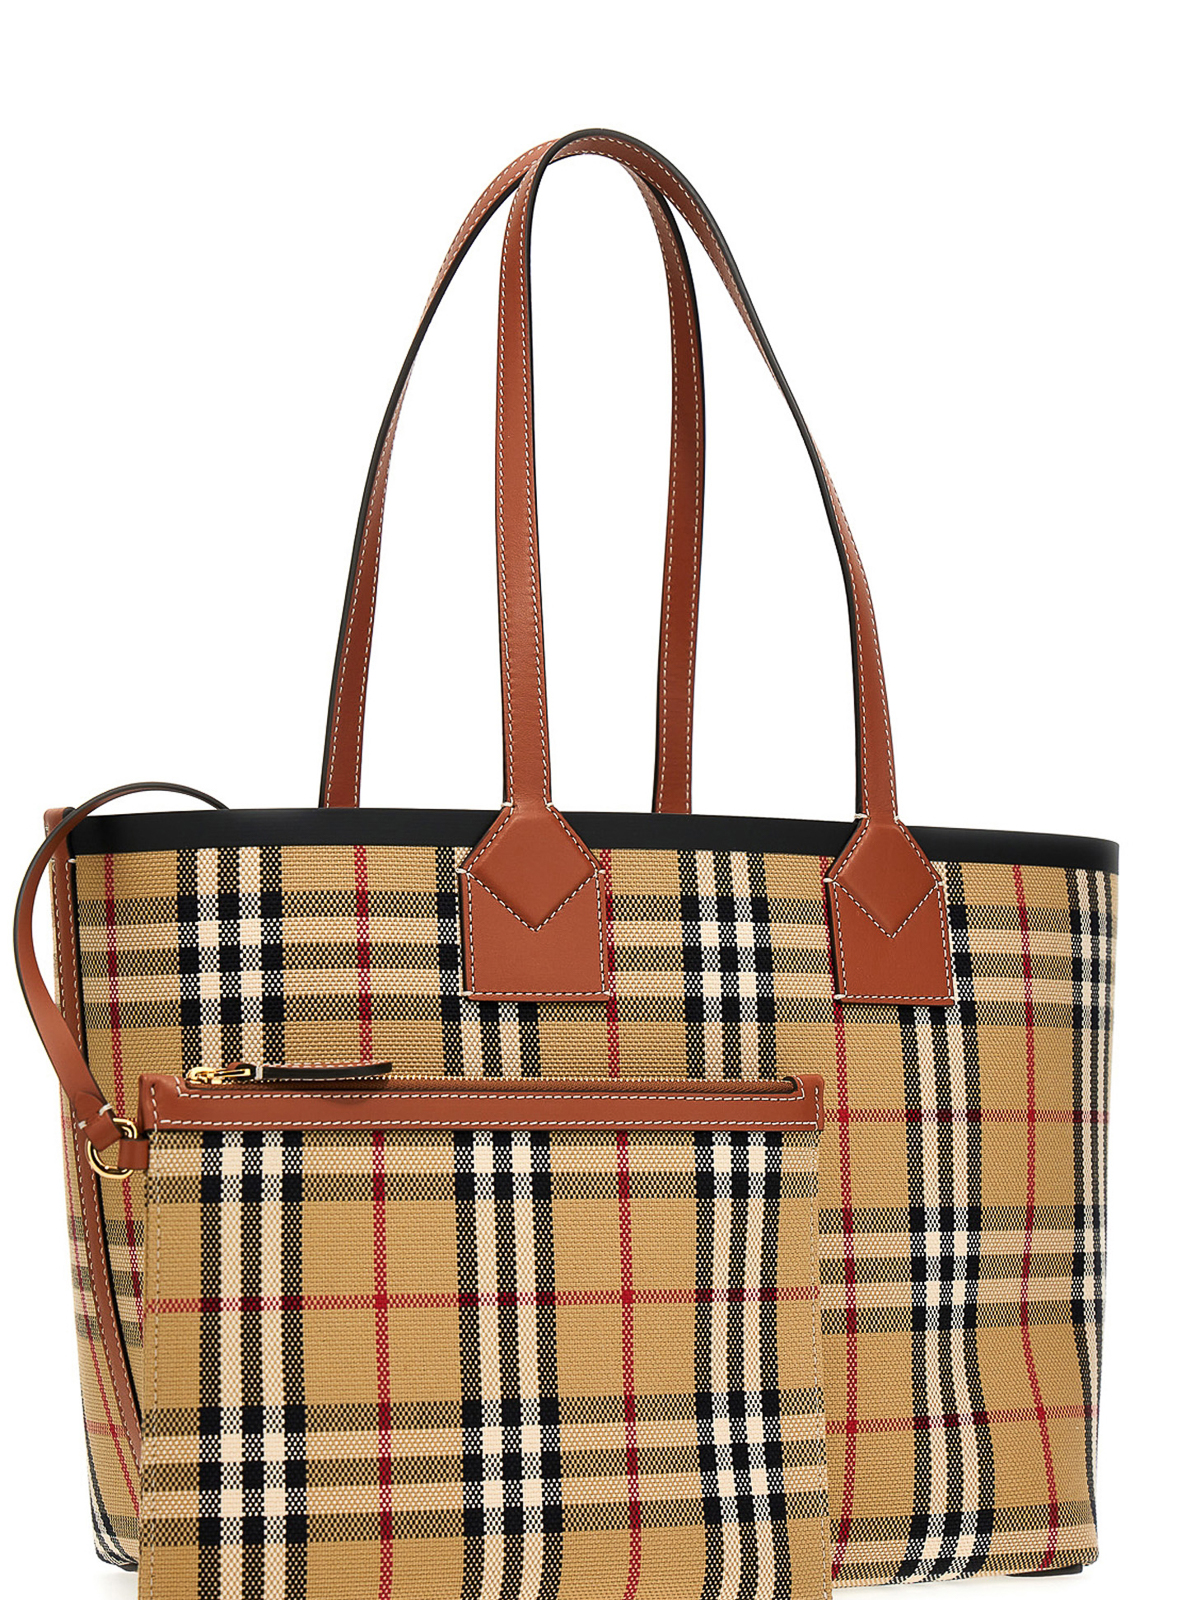 Shop Burberry London Shopping Bag In Brown